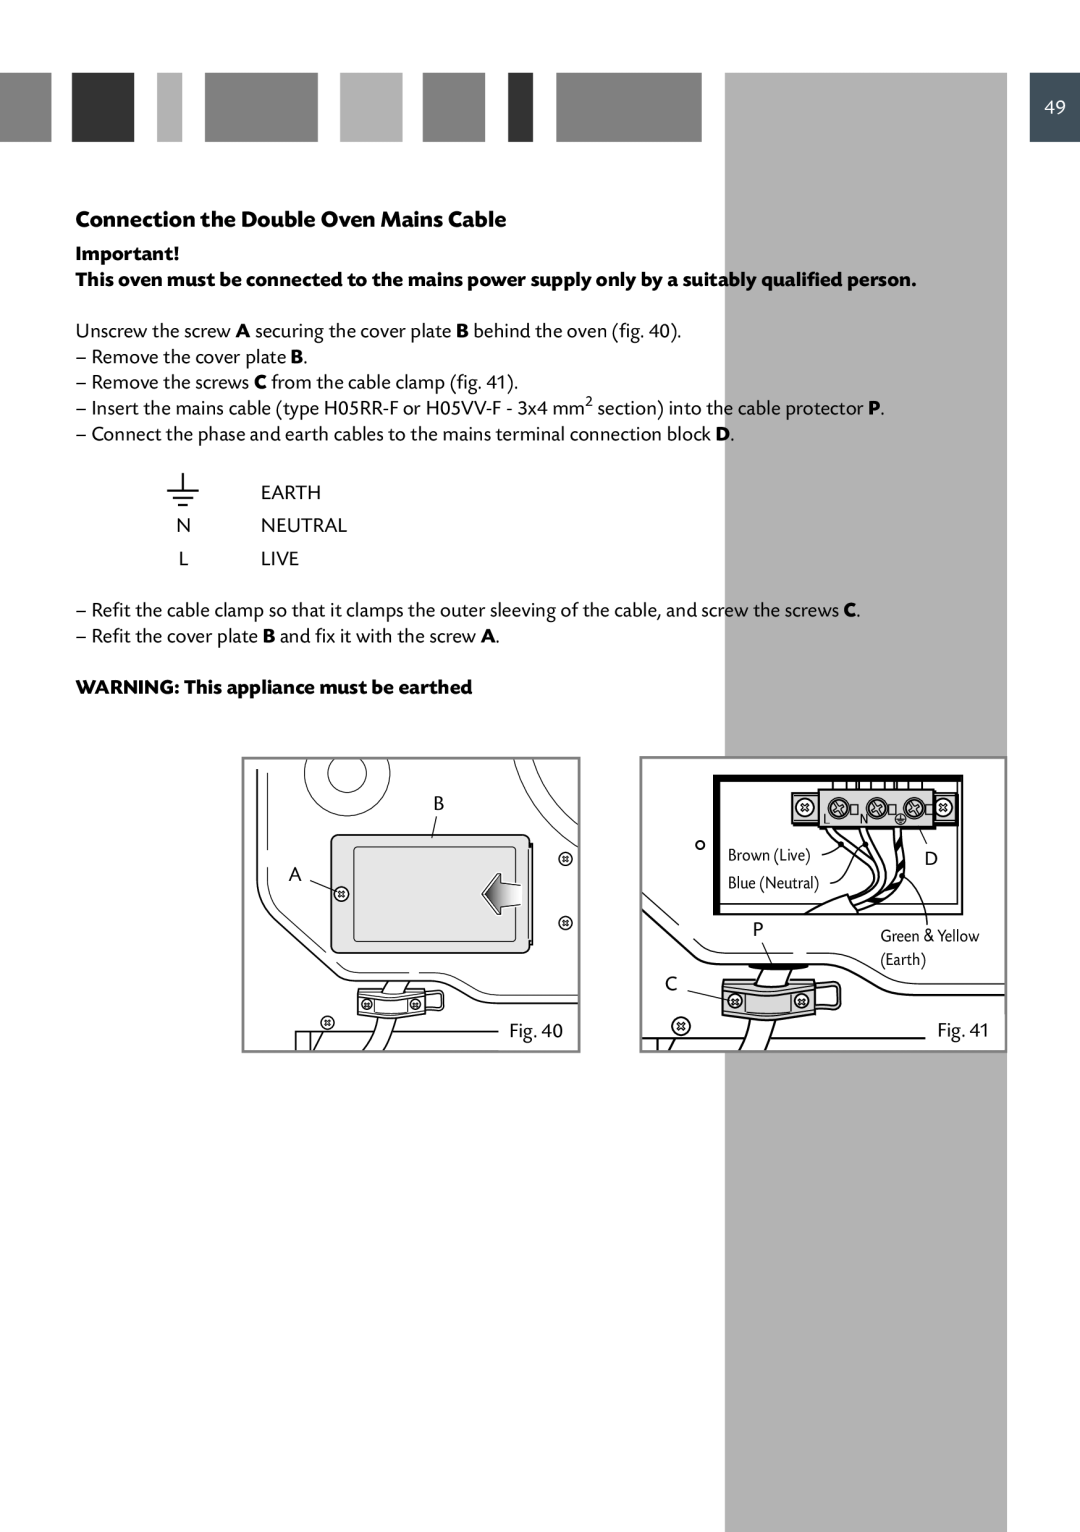 CDA 11Z6 manual Connection the Double Oven Mains Cable, WARNING This appliance must be earthed 